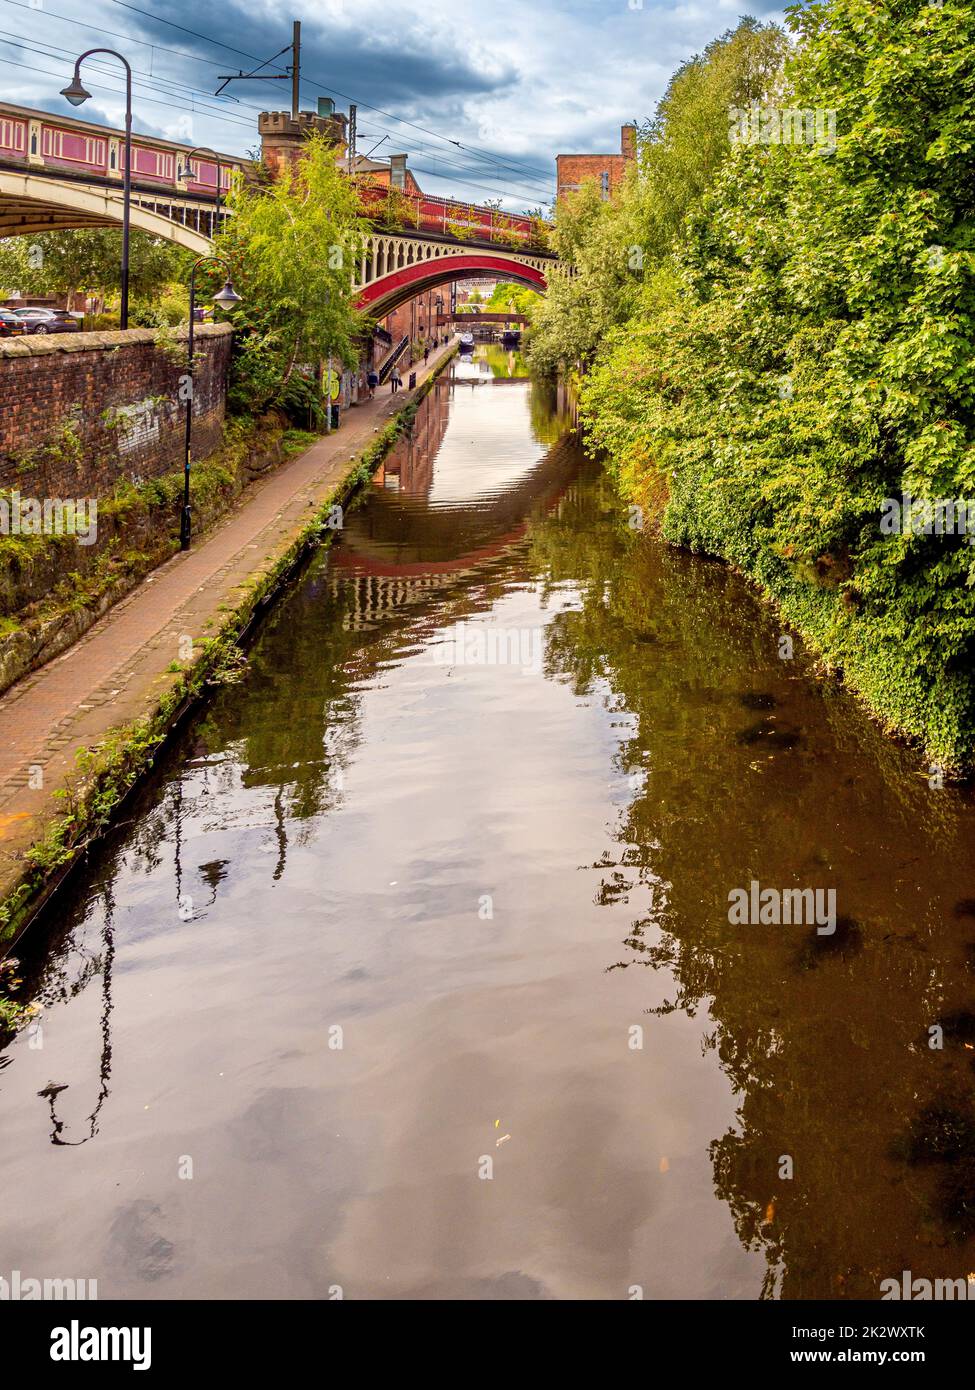 Rochdale canal tow path running under the railway lines of the Bridgewater viaduct in the Castlefield area of Manchester. UK. Stock Photo